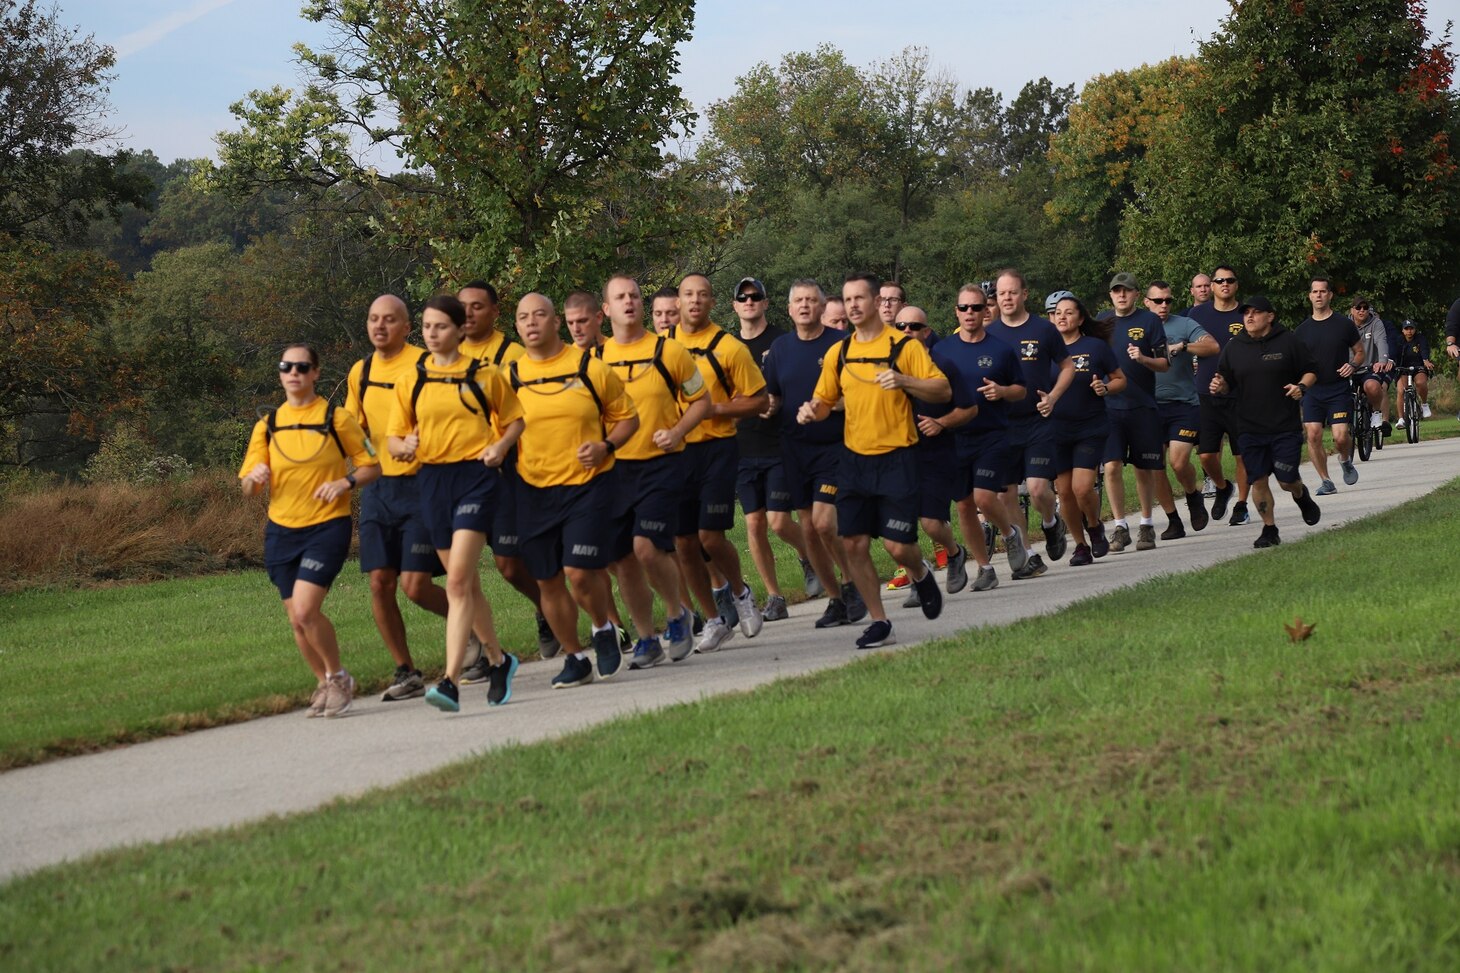 Fourteen chief petty officer selects assigned to Navy Operational Support Center Fort Dix, Fleet Readiness Center Reserve Mid-West, Detachment McGuire, and Fleet Logistics Support Squadron 64 joined their active duty CPO Selectee classmates from Joint-Base McGuire Dix Lakehurst (JBMDL) for a naval history and heritage run held at Valley Forge National Historic Park Oct. 16.